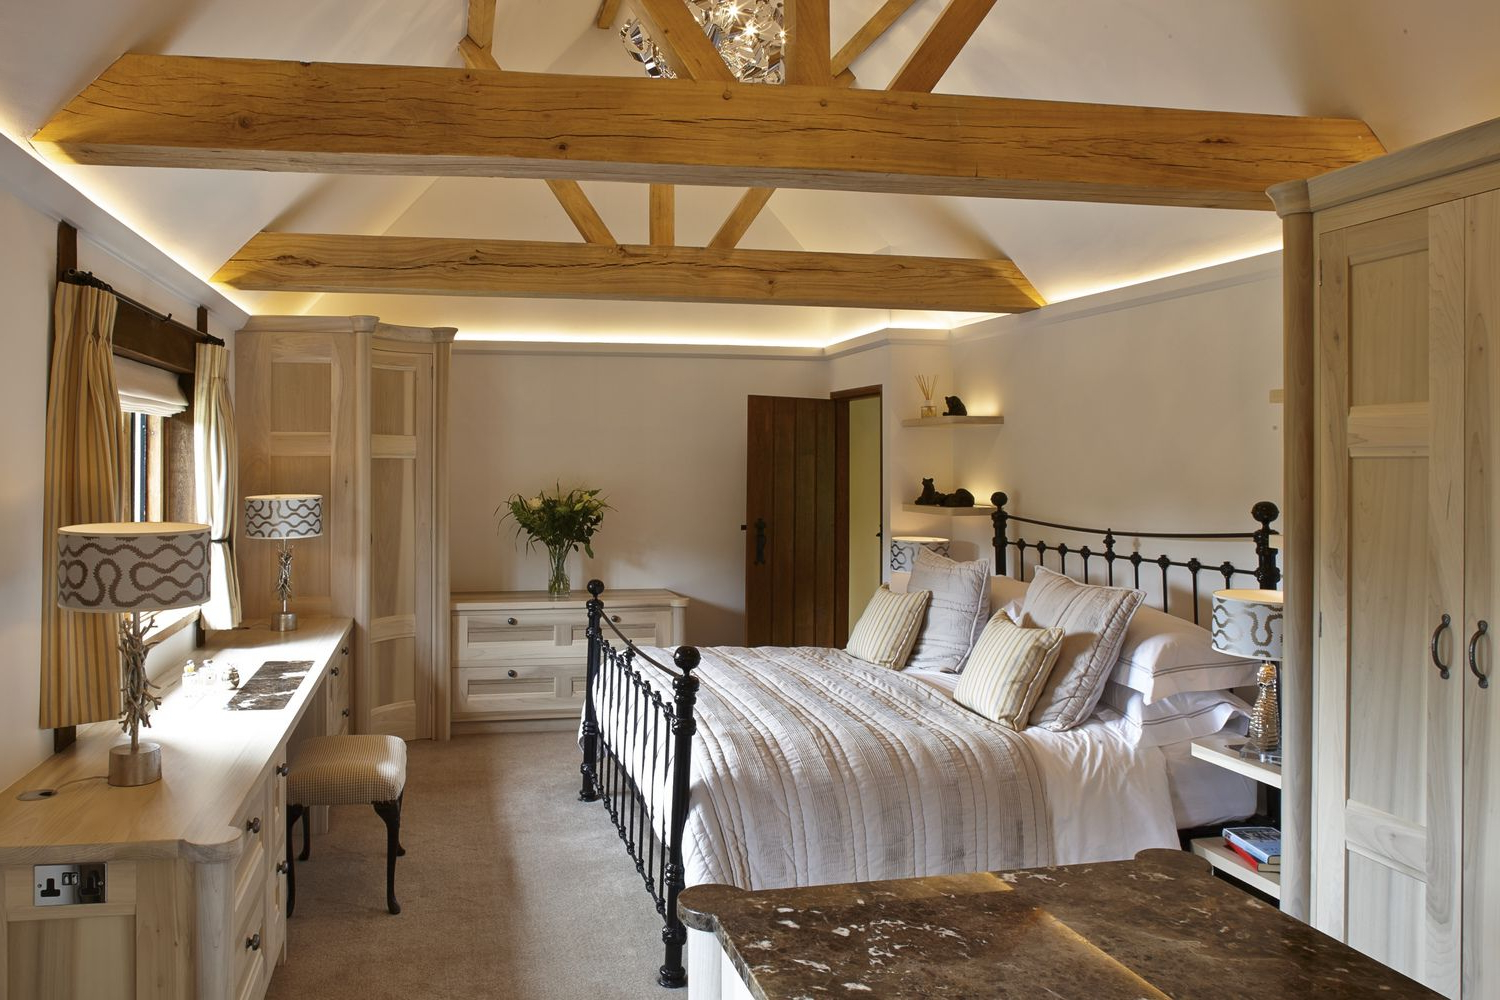 Bedroom Furniture And Vaulted Ceiling In 2020 Vaulted